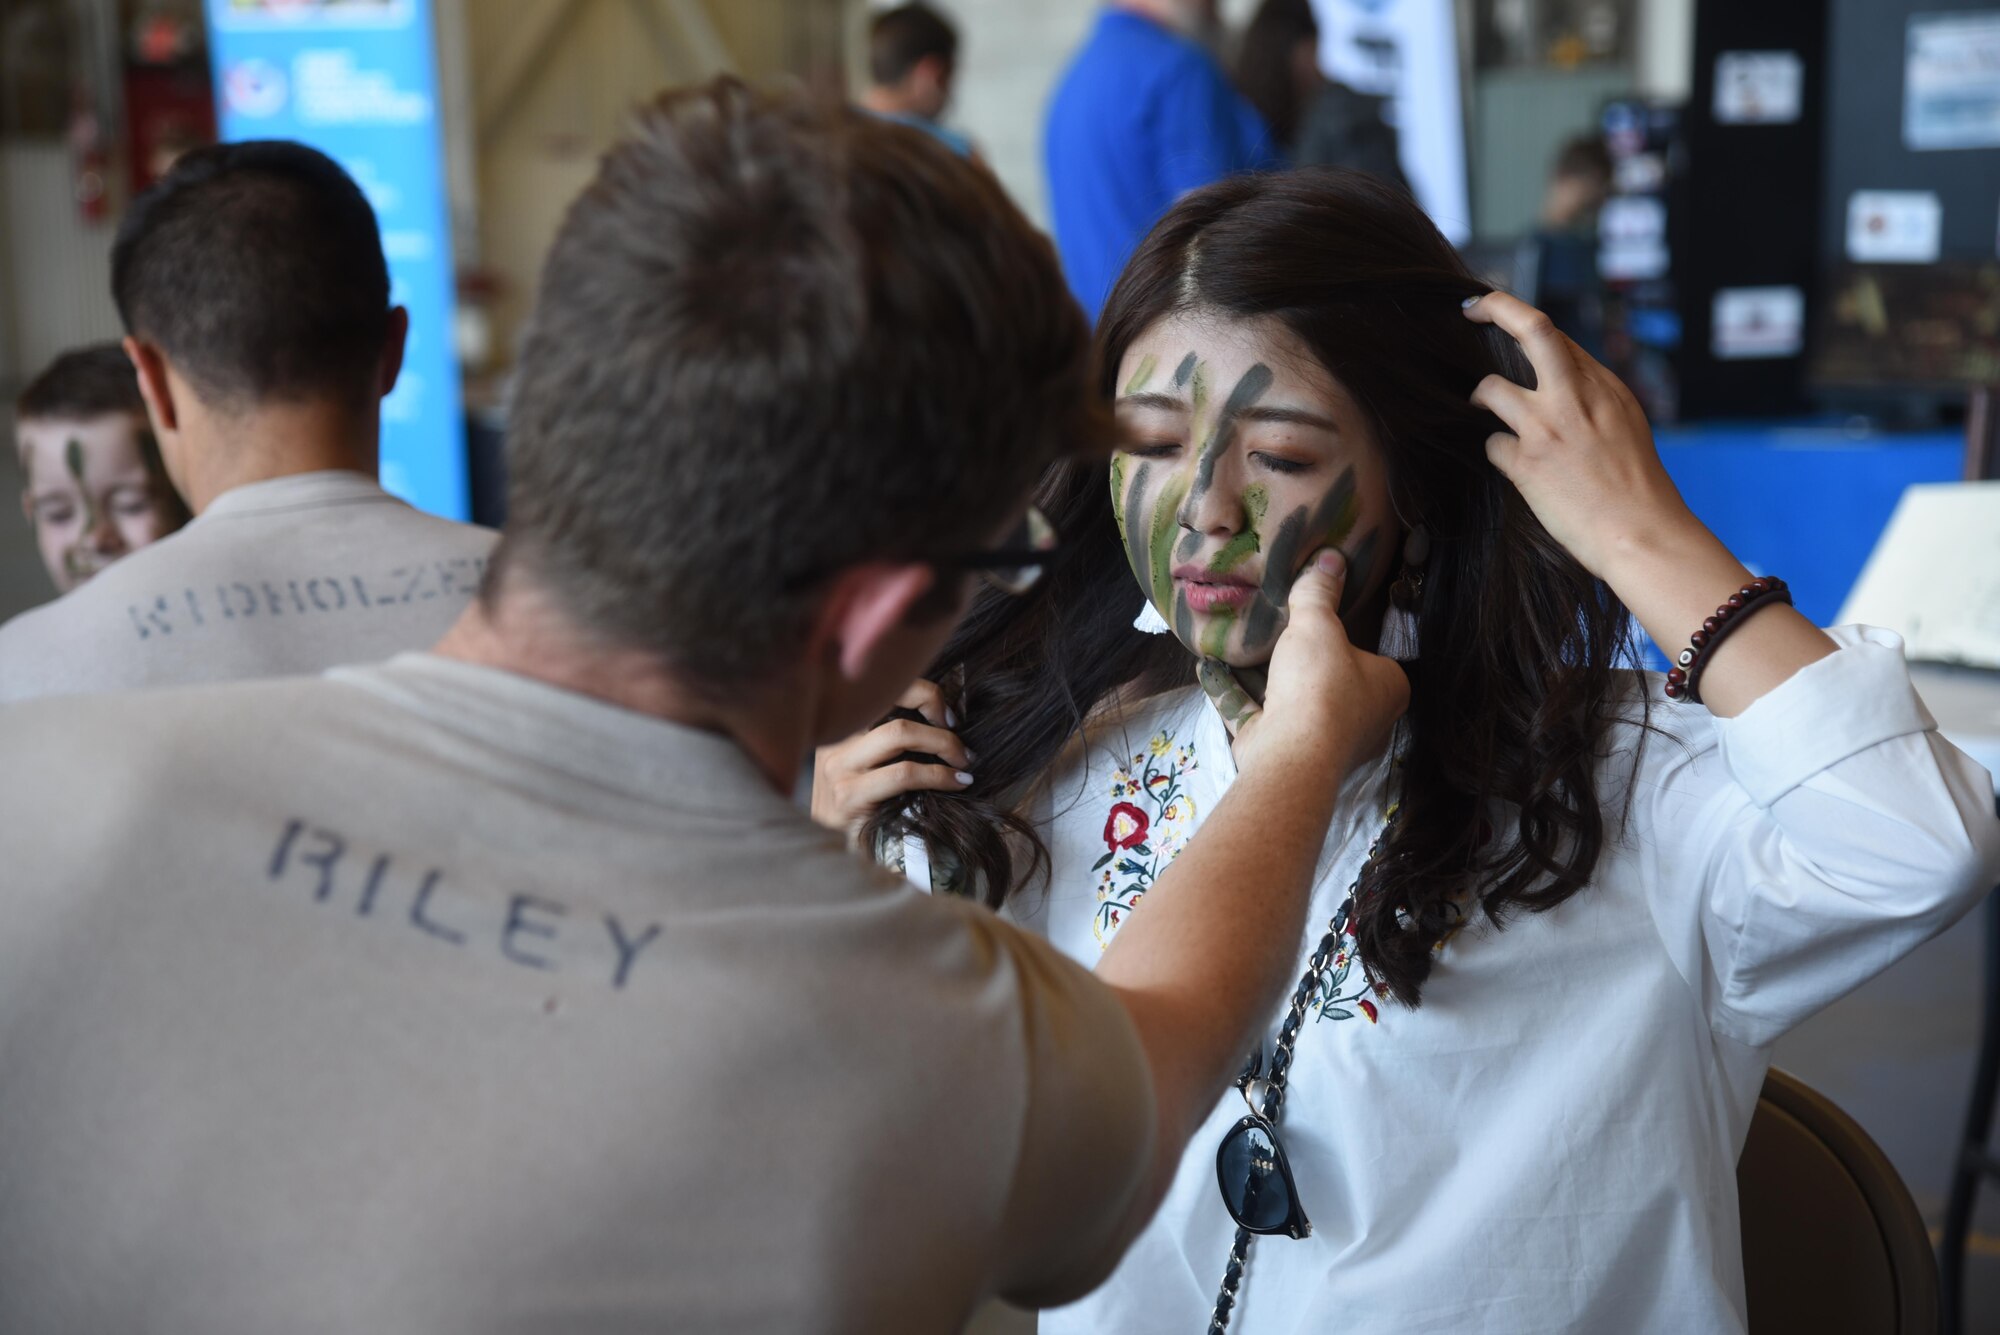 Senior Airman James Riley, Survival Evasion Resistance and Escape specialist, applies camouflage paint a visitors face during the SkyFest 2017 Air Show and Open House July 30, 2017, at Fairchild Air Force Base, Washington. SkyFest 2017 is a community event  to inform the public about Air Force assets and to showcase the capabilities of its aircraft. (U.S. Air Force photo/Senior Airman Nick J. Daniello)